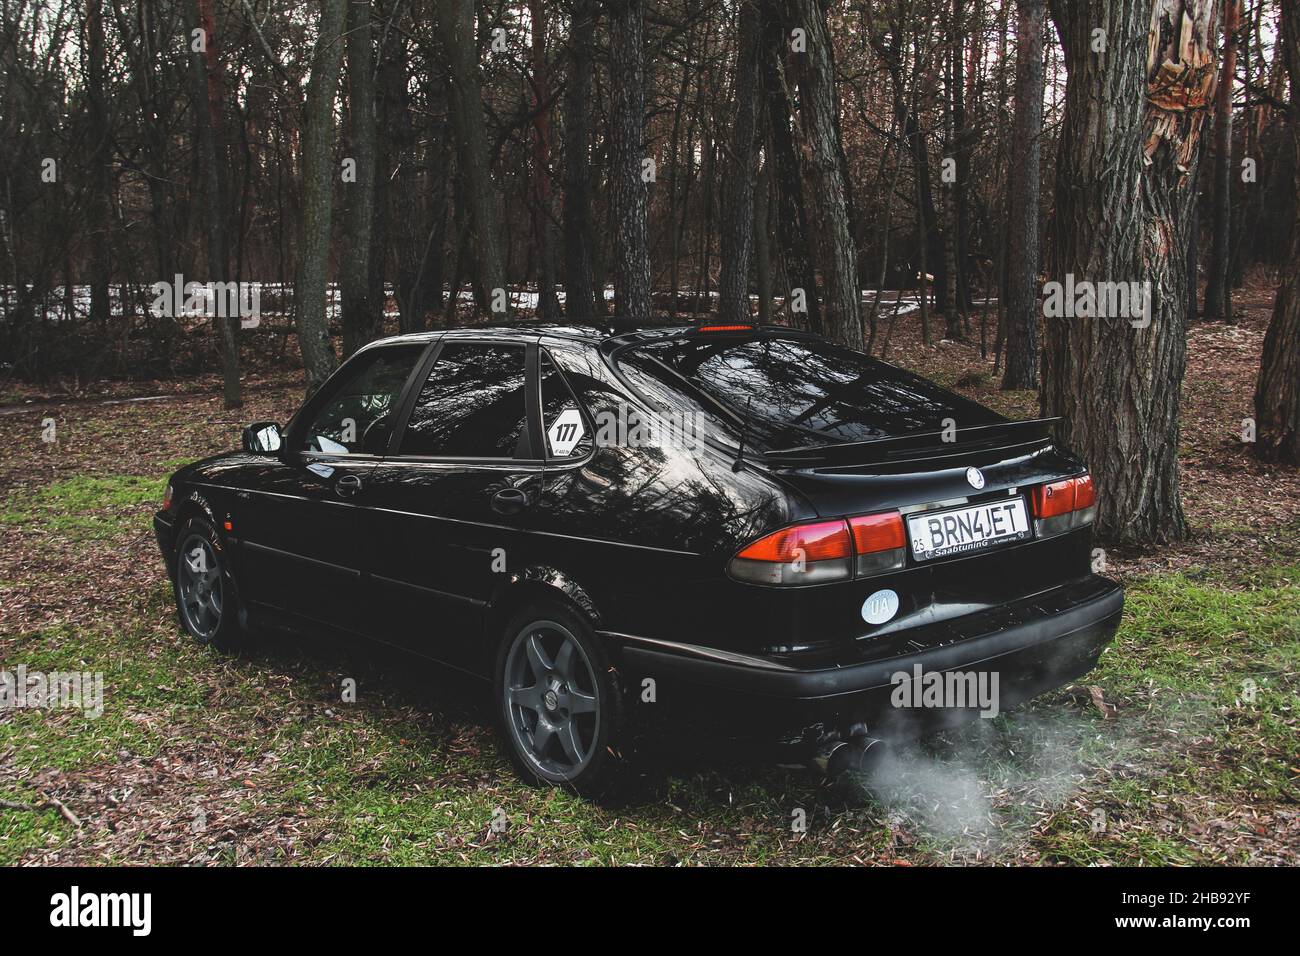 Chernihiv, Ukraine - March 20, 2021: Old Swedish car Saab 900 Turbo in the forest Stock Photo